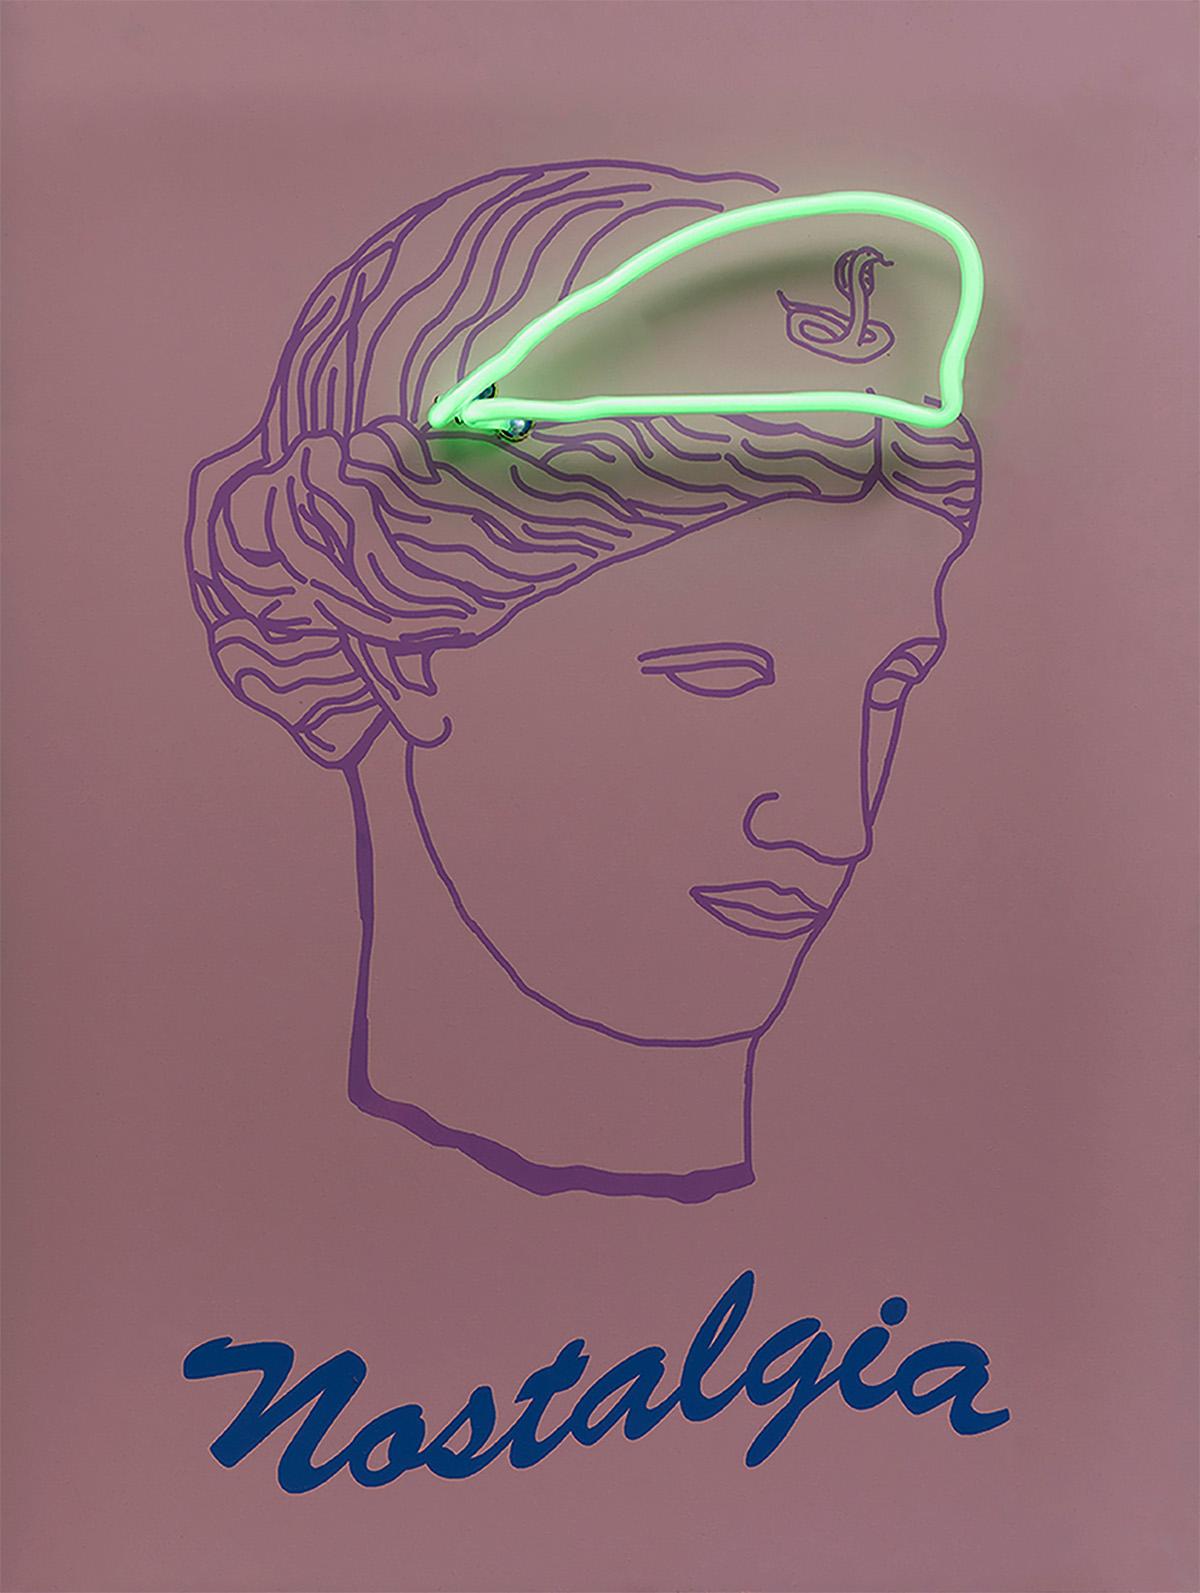 A set of 6 neon light wall sculptures, 2019  Paloma Castello 
From the series Neon Classics
Screen printing with neon lights
Overall size: 24 H in x 108.6 W x 5.9 D in. 
Individual size: 24 H in x 18.1 W x 5.9 D in. 
Edition 7/10

In her work she